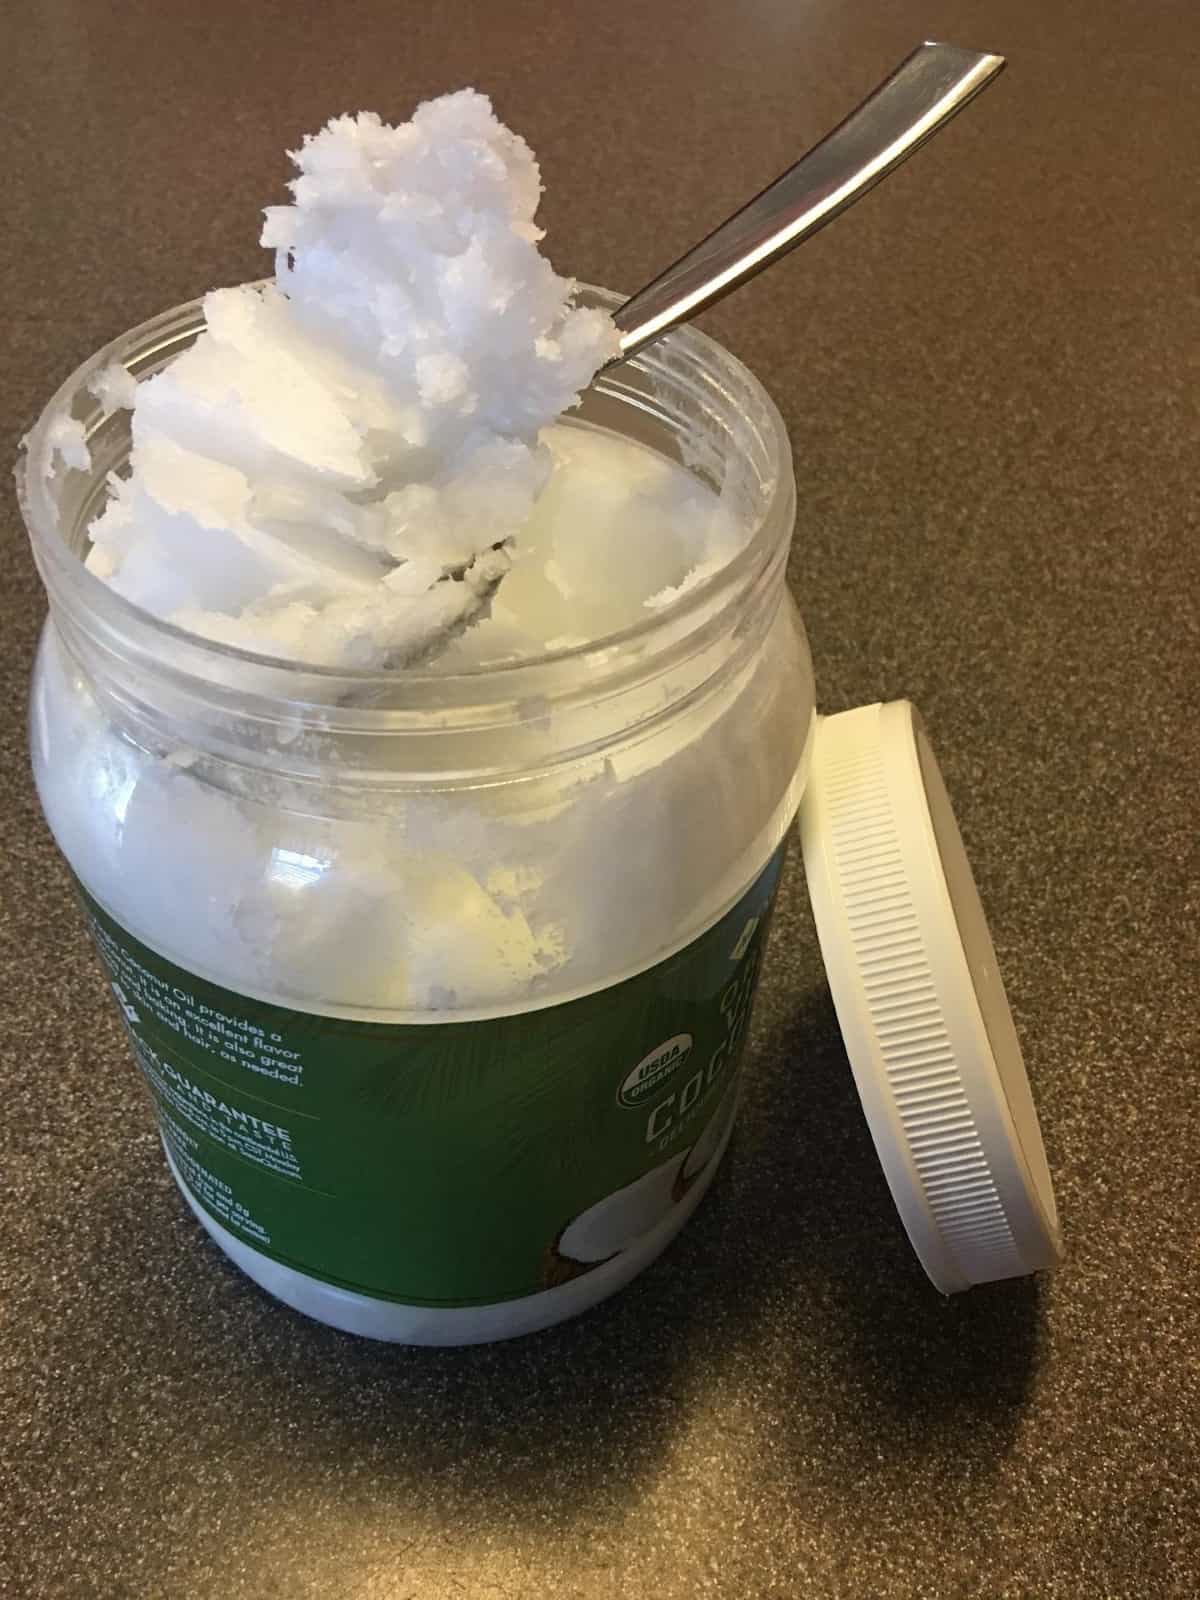 scooping coconut oil out of a jar with a spoon.